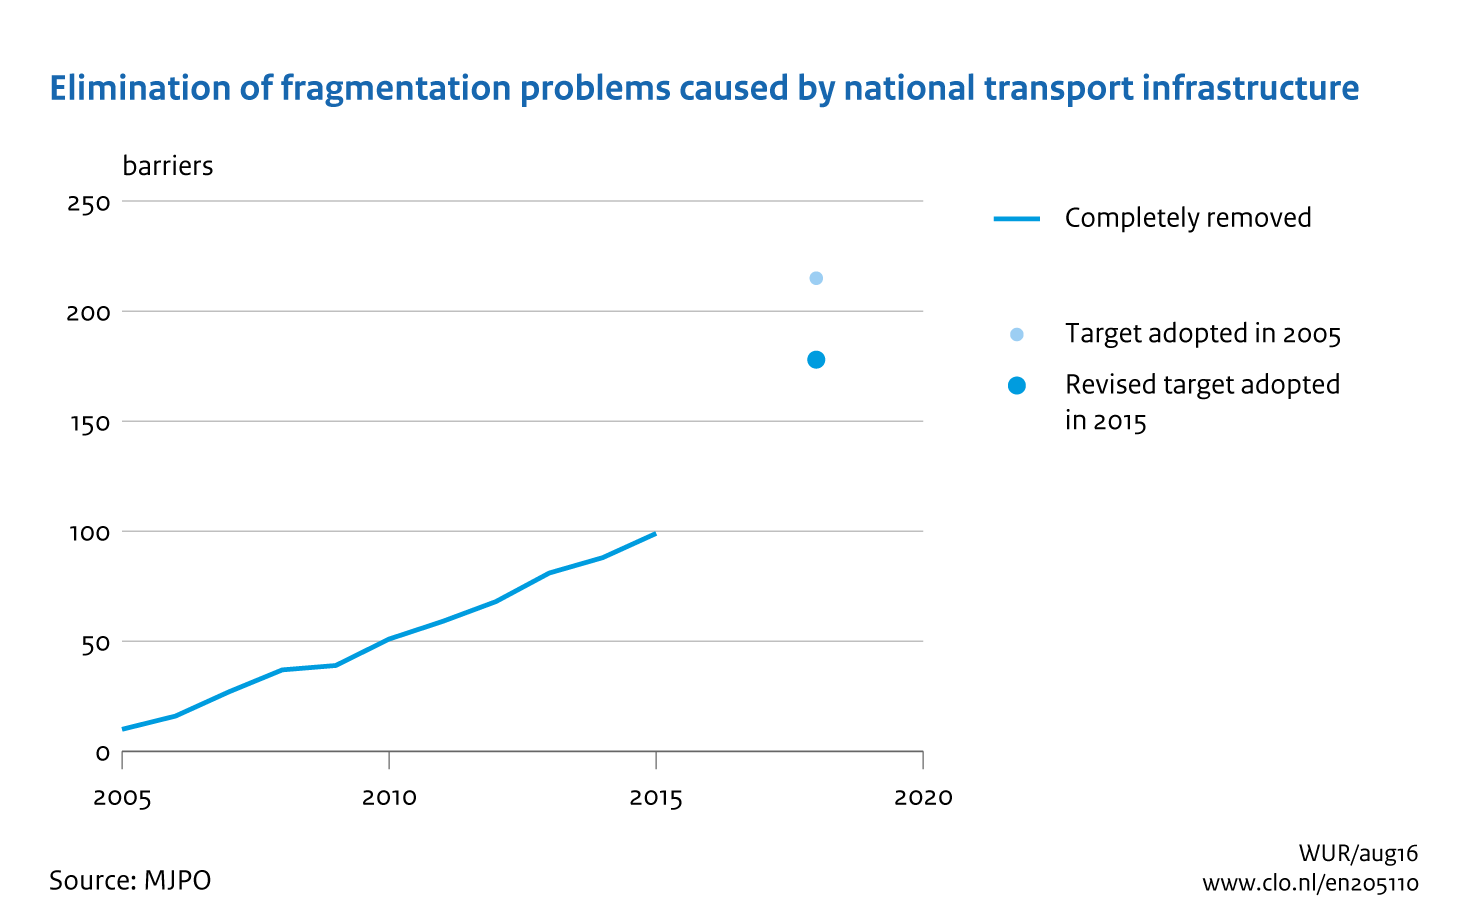 Image Elimination of fragmentation problems caused by national infrastructure . The image is further explained in the text.